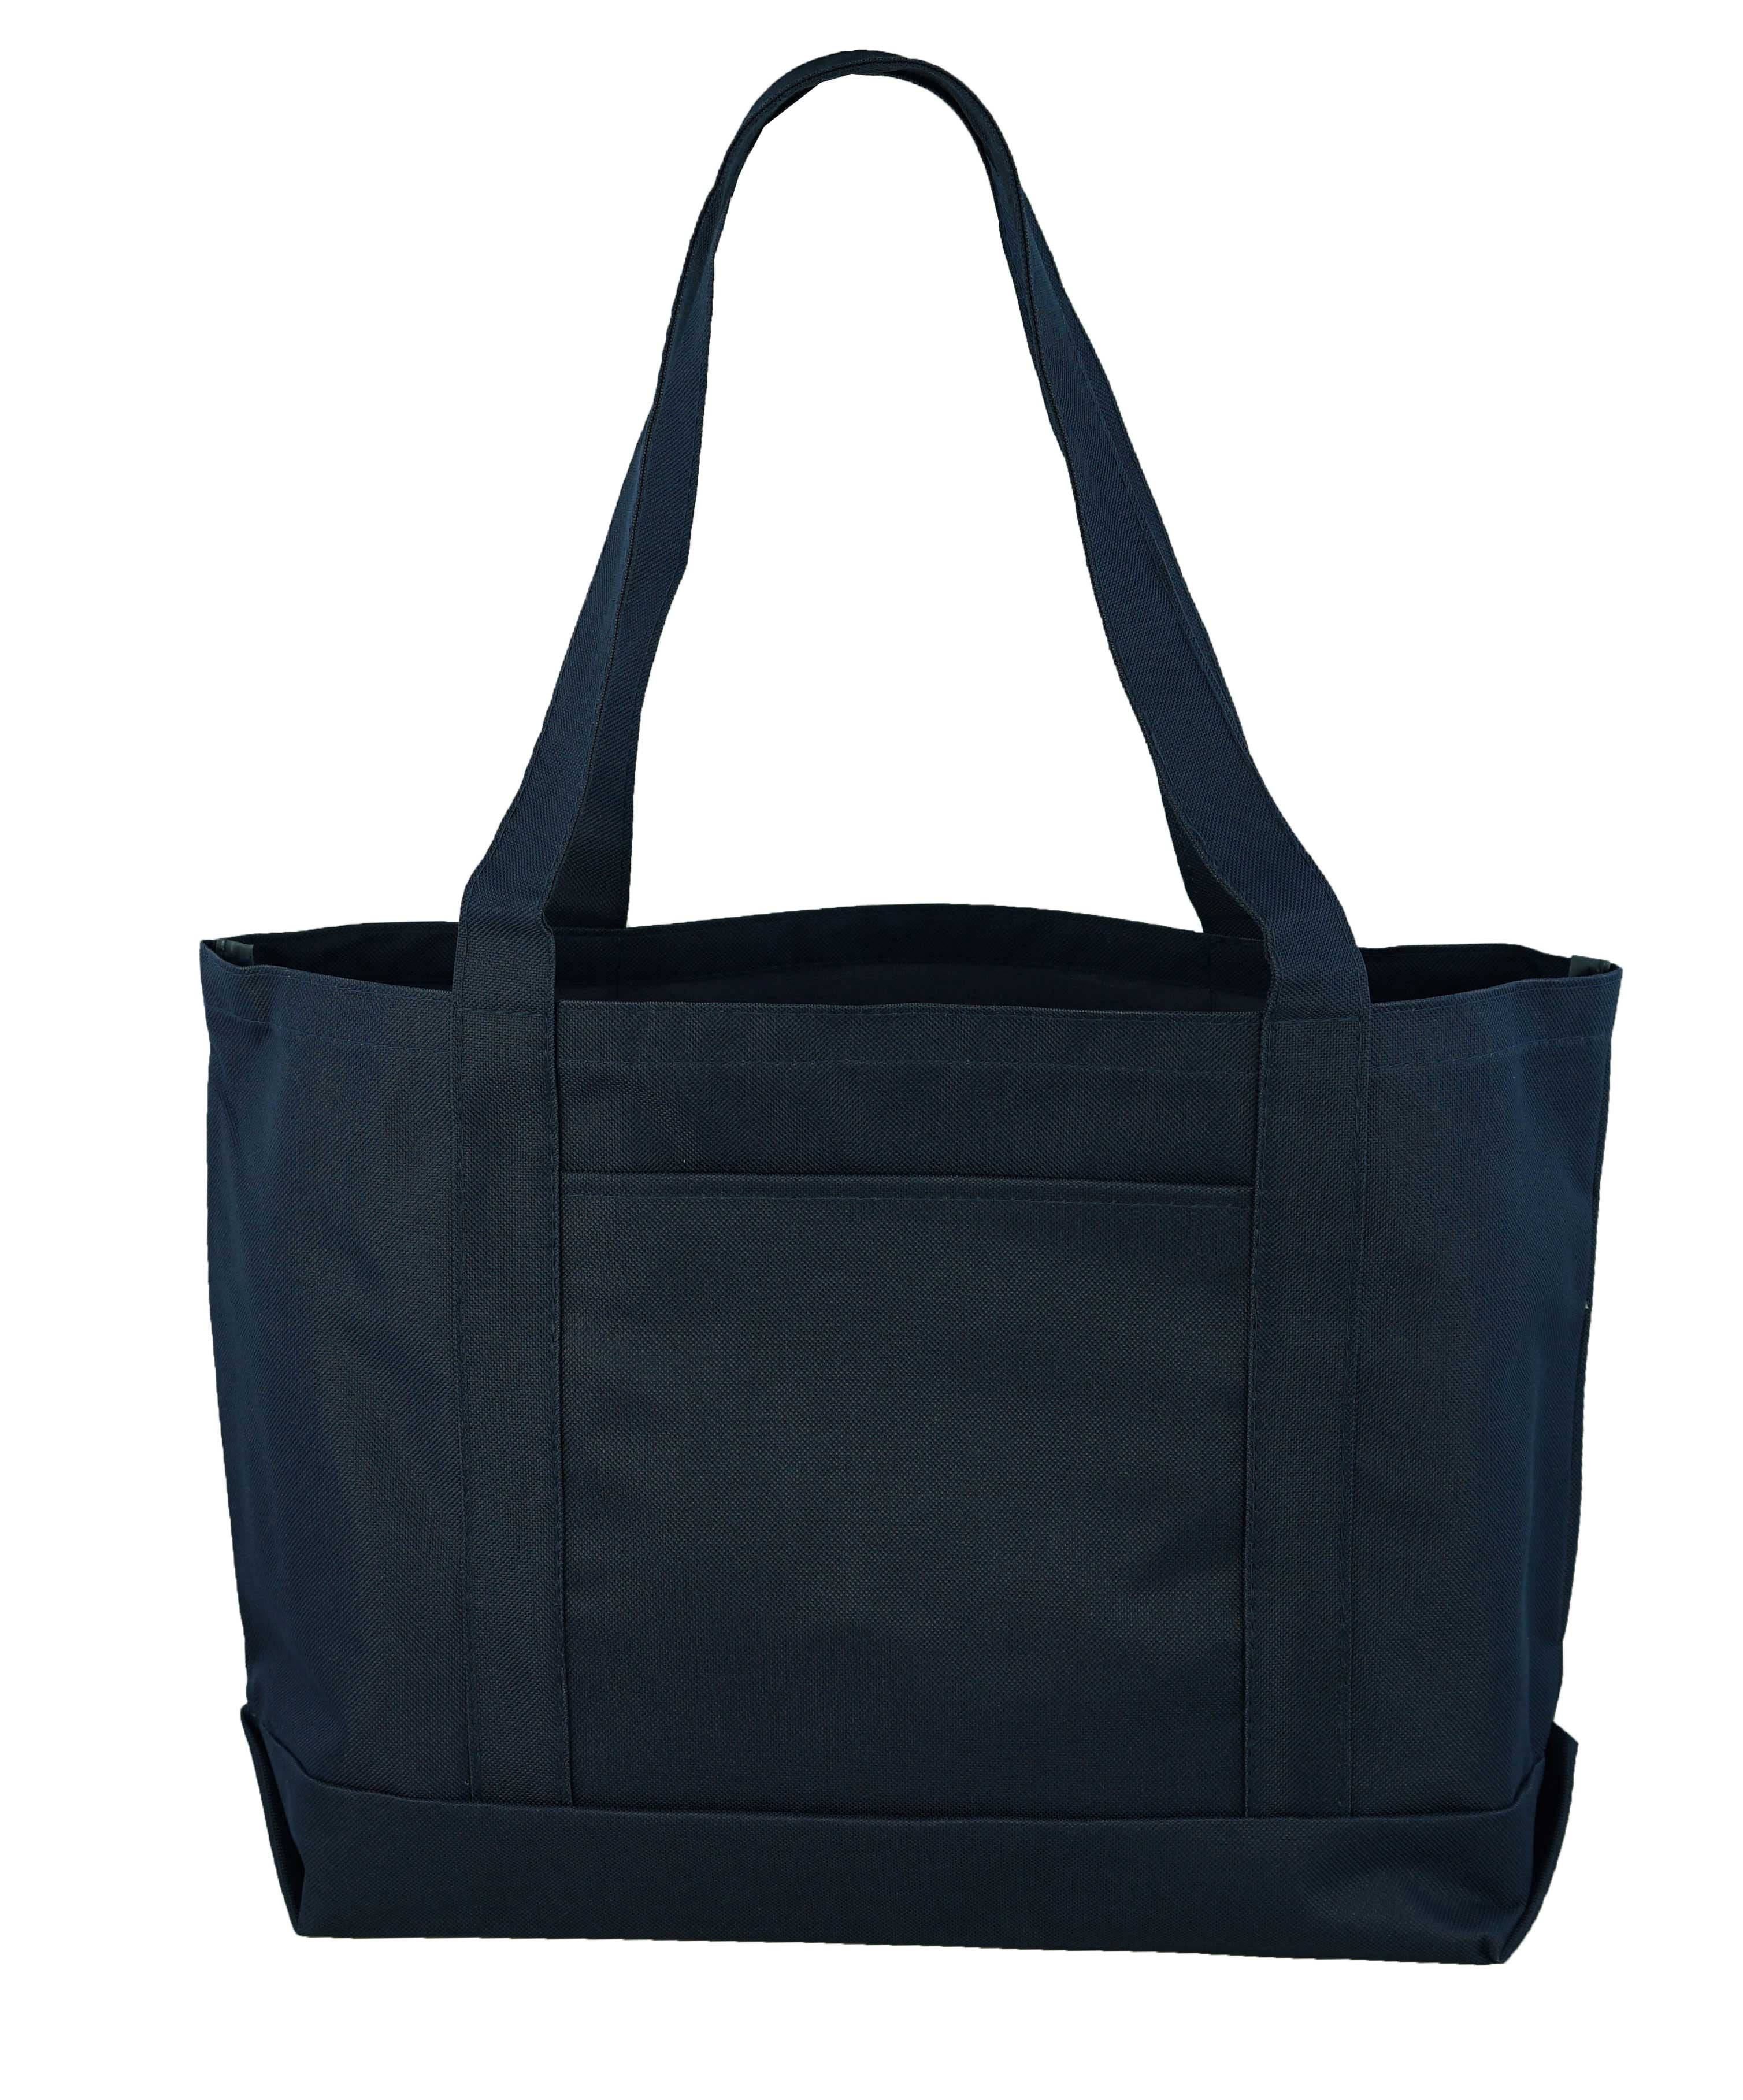 Daily Tote with Shoulder Length Handle and Outside Pocket - Walmart.com